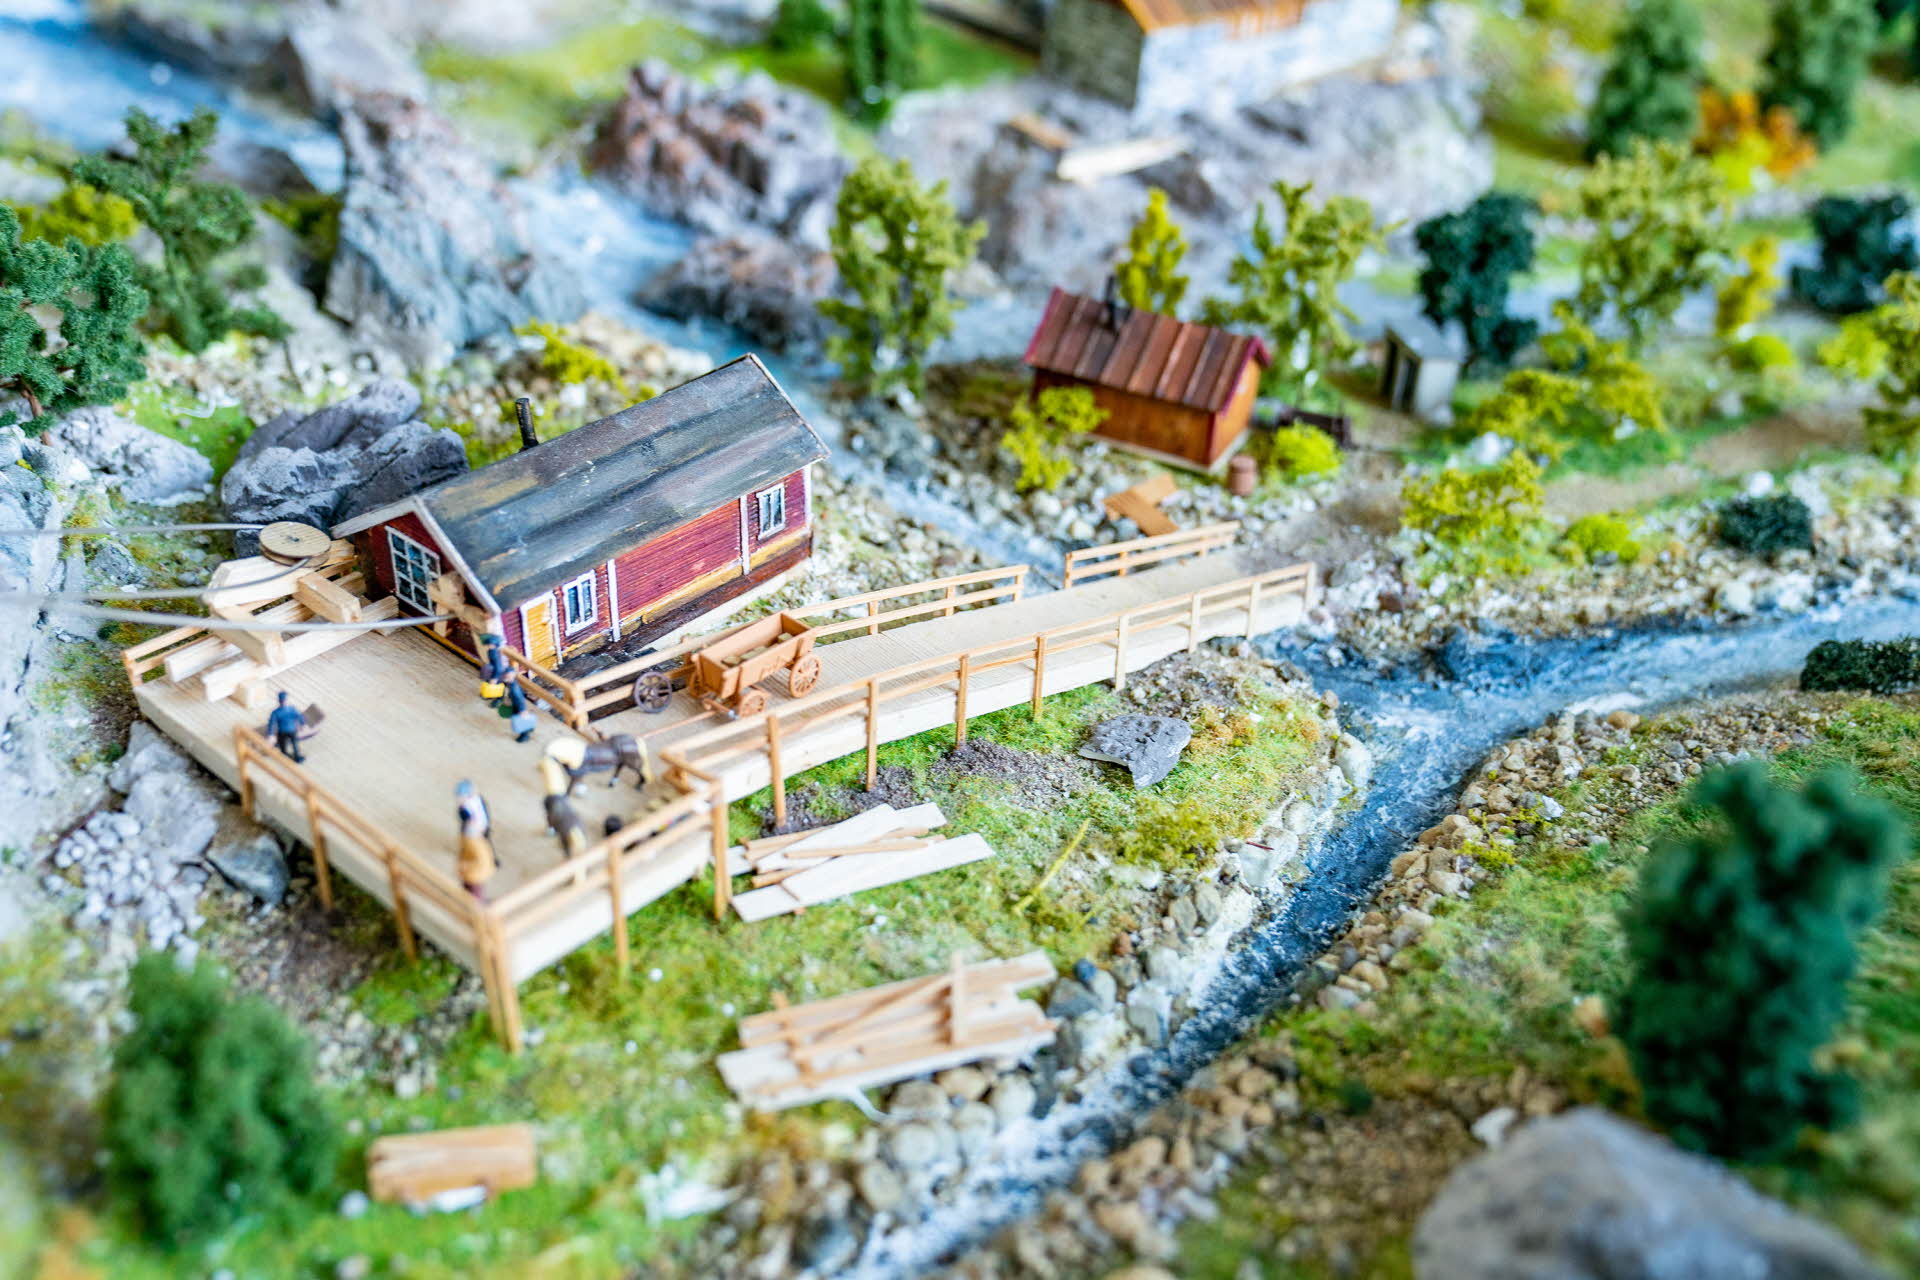 Diorama of the navvy life on the Ofot Railway during its construction in the early 19th century